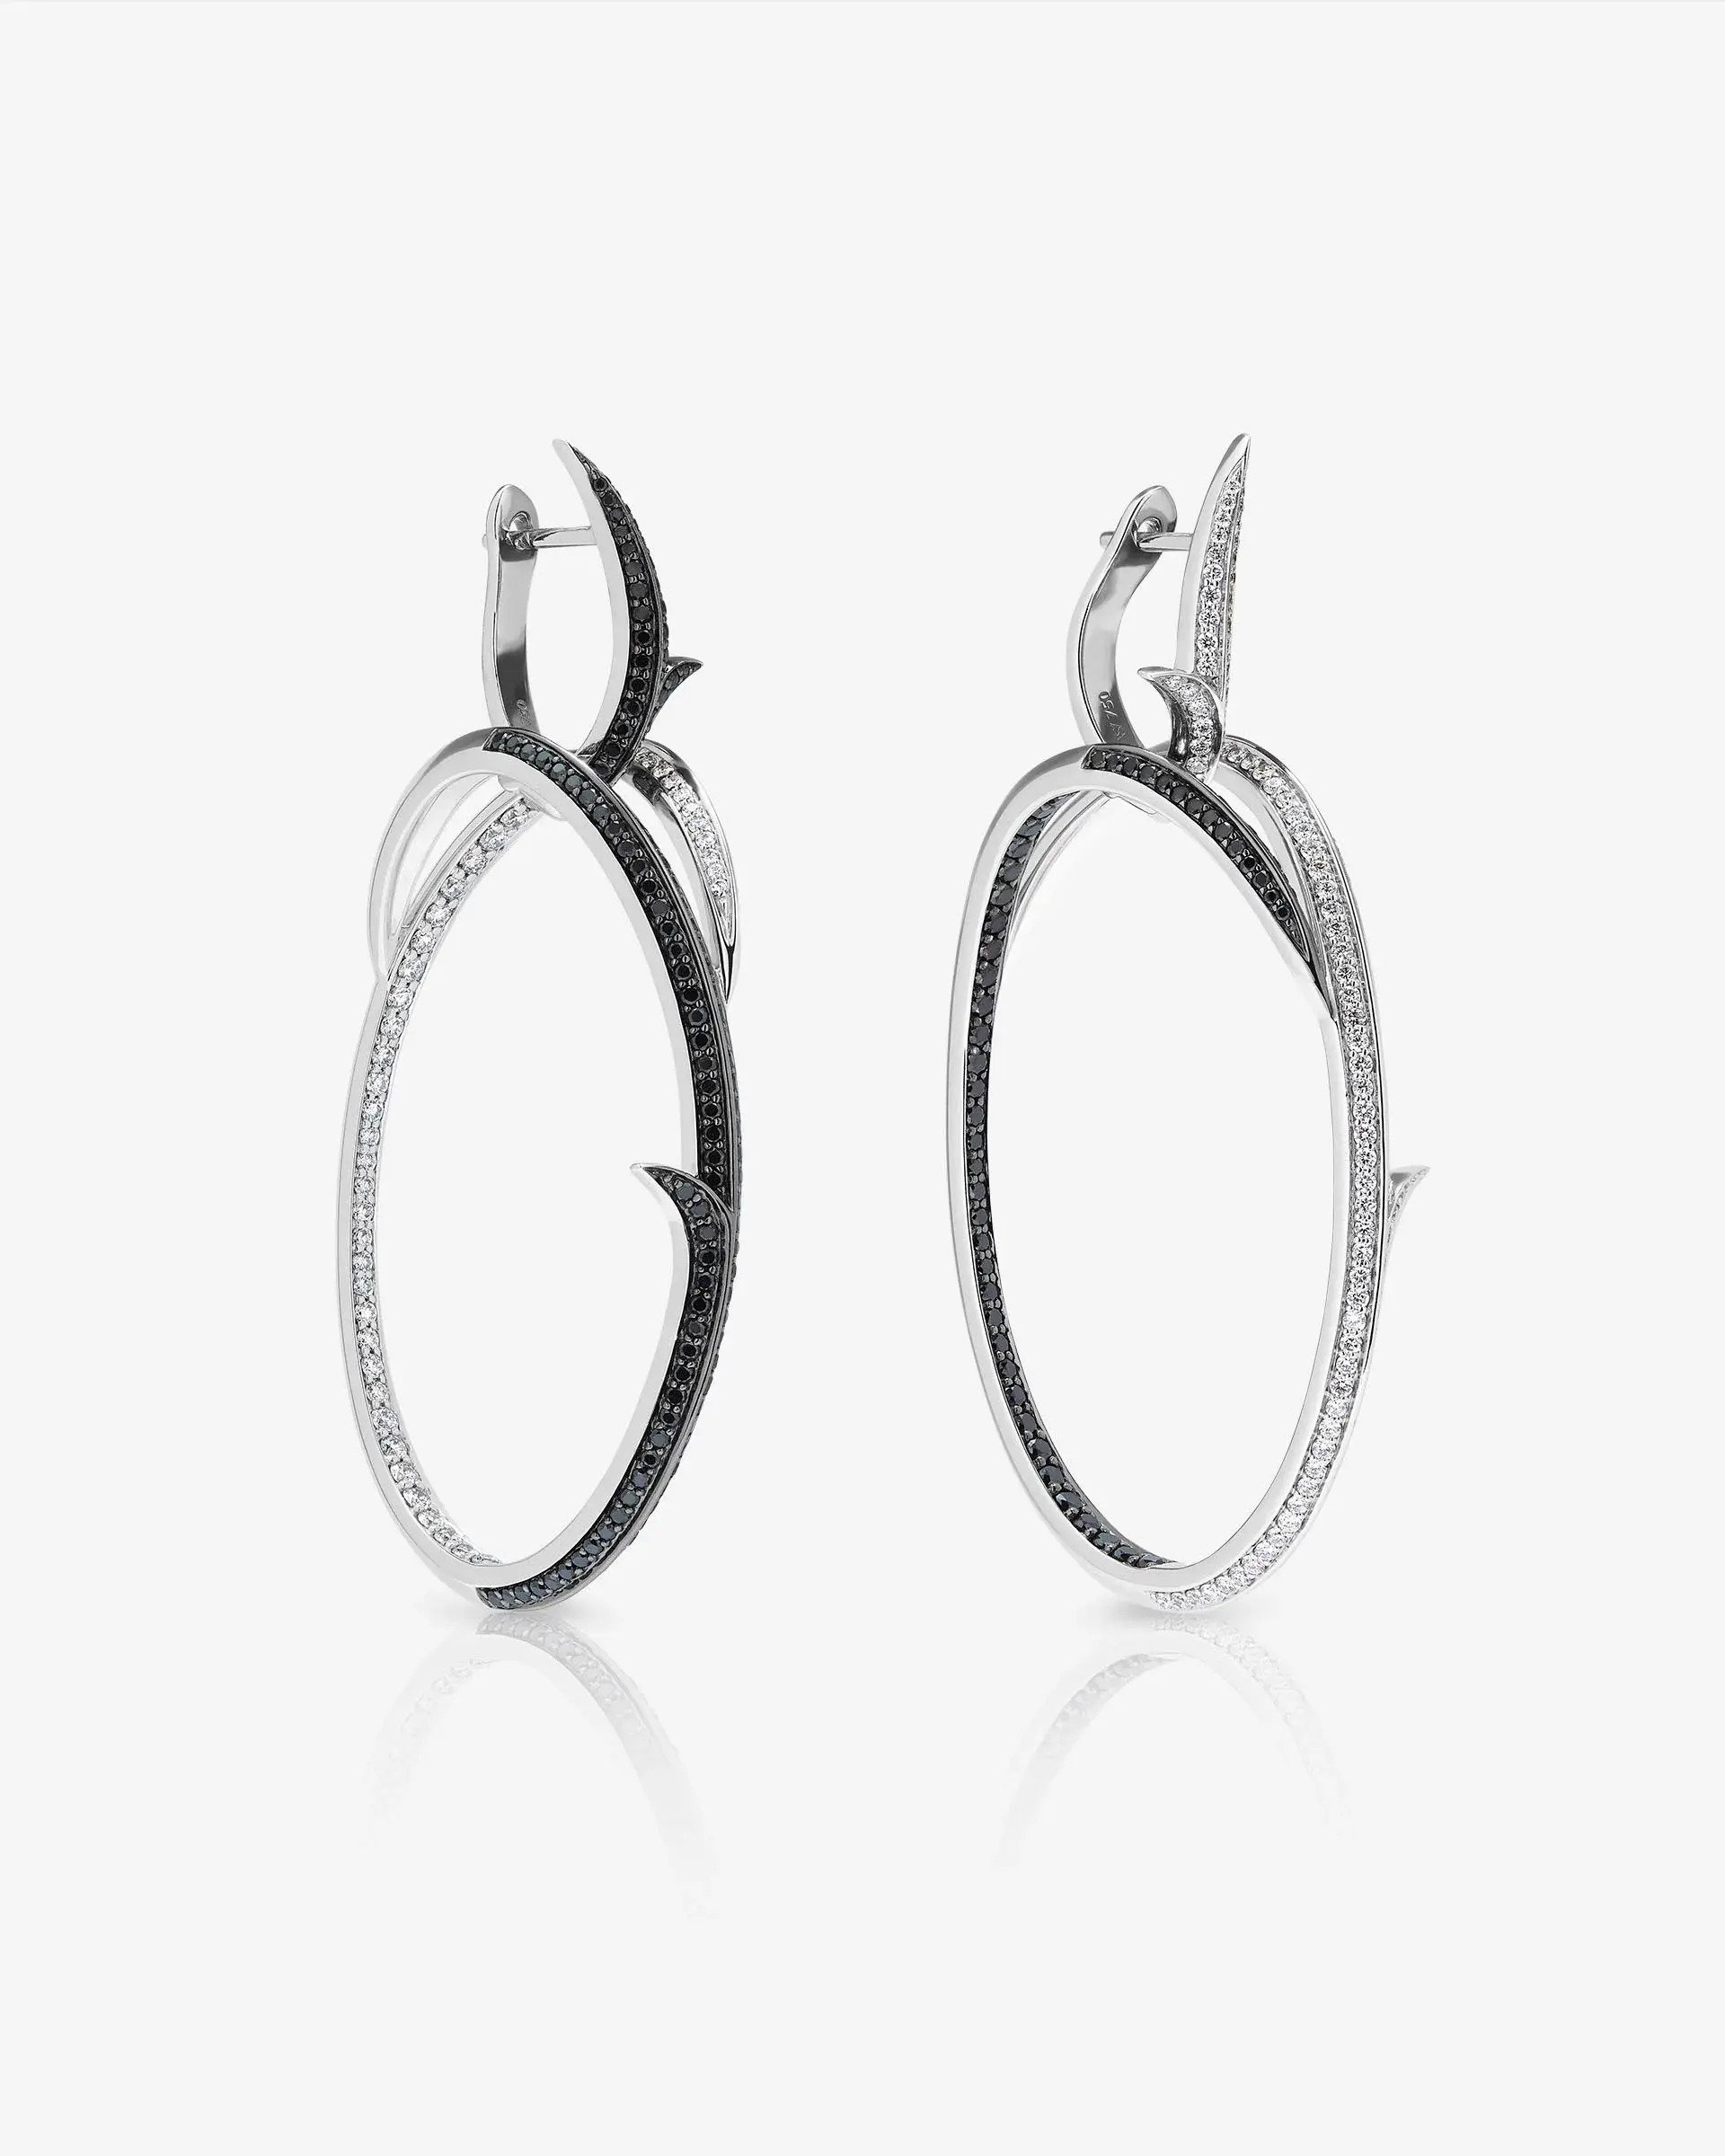 Thorn Embrace Infinity Hoop Earrings with Black and White Diamonds in 18kt White Gold